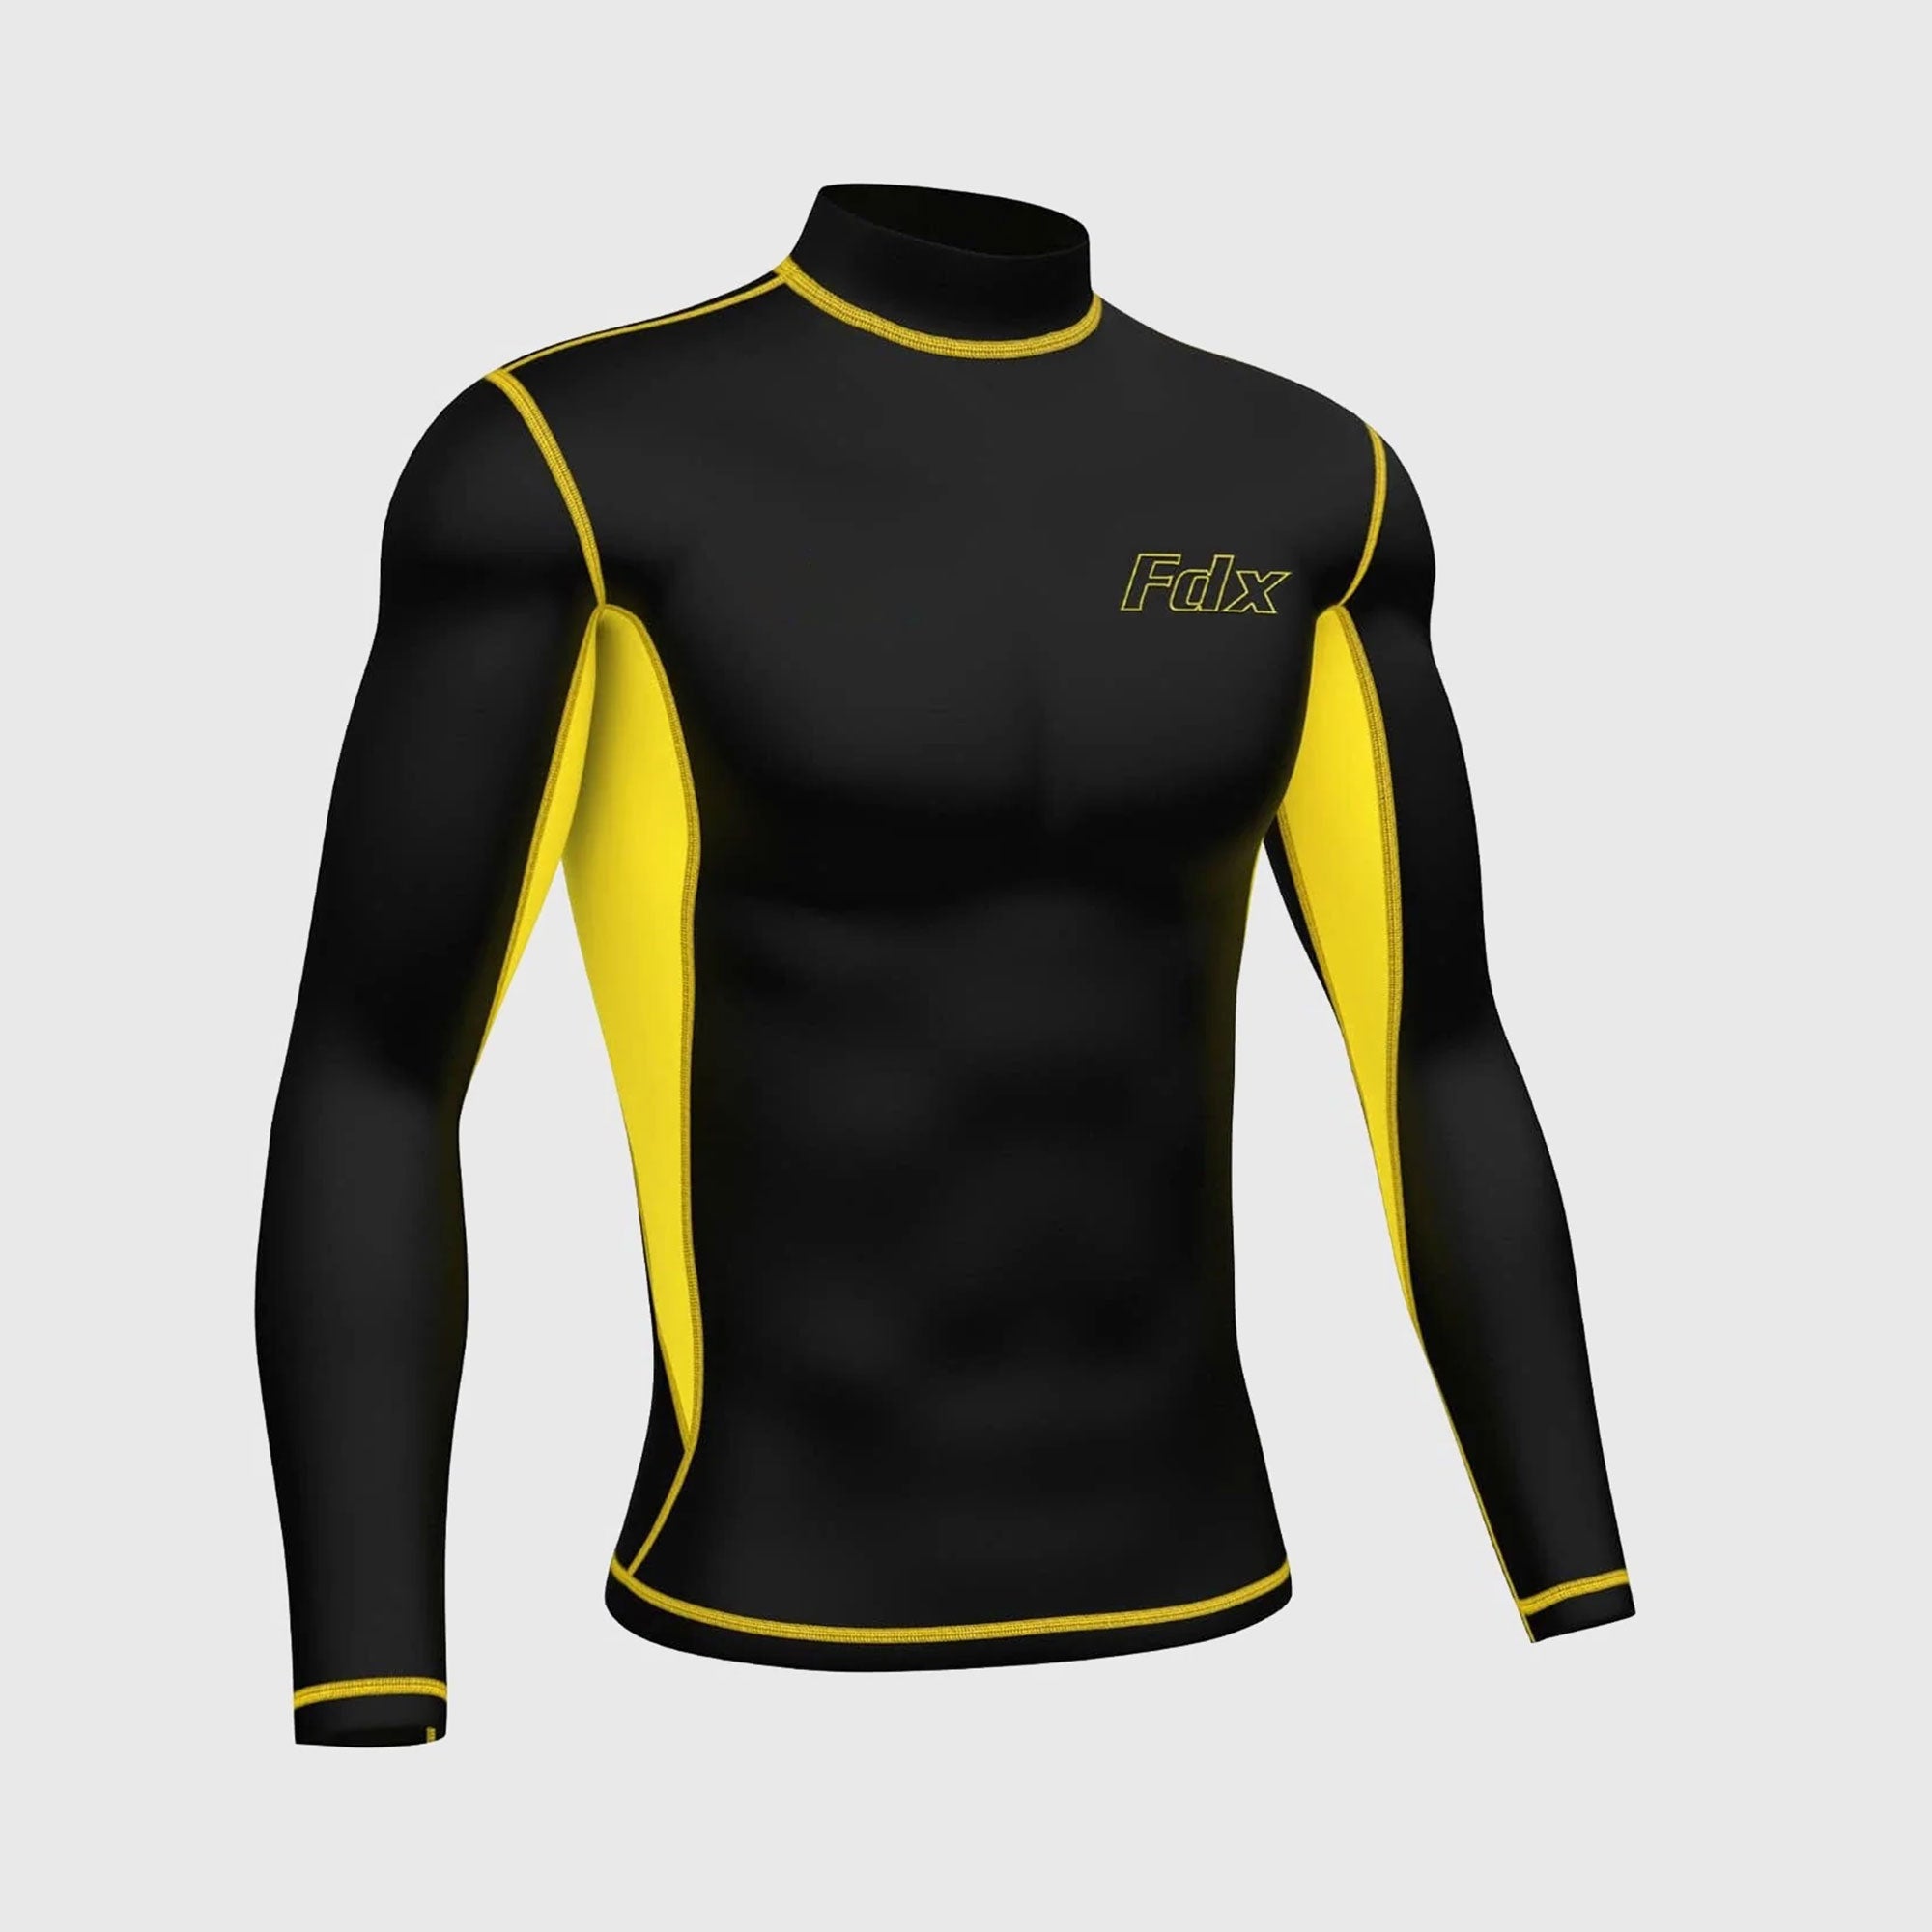 Fdx Inorex Yellow Men's Thermal Winter Base Layer Compression Top